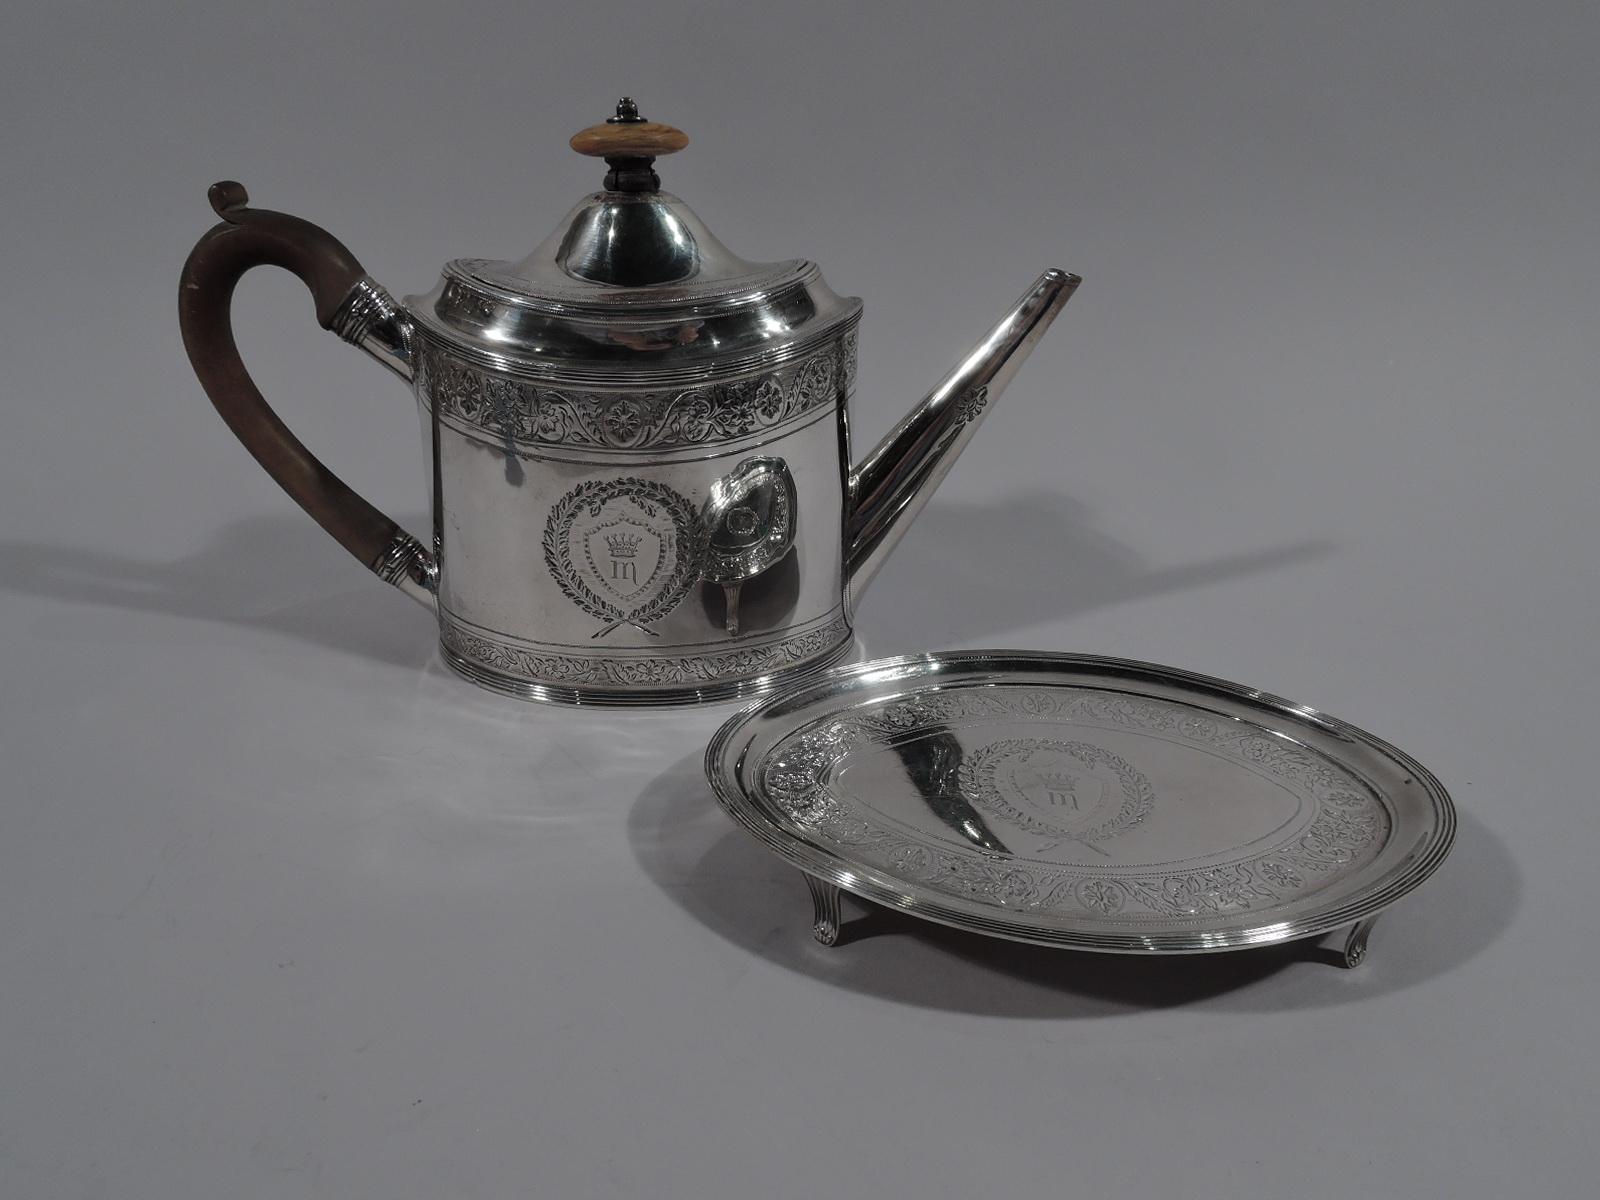 Late 18th Century Peter and Ann Bateman Neoclassical Sterling Silver Teapot on Stand